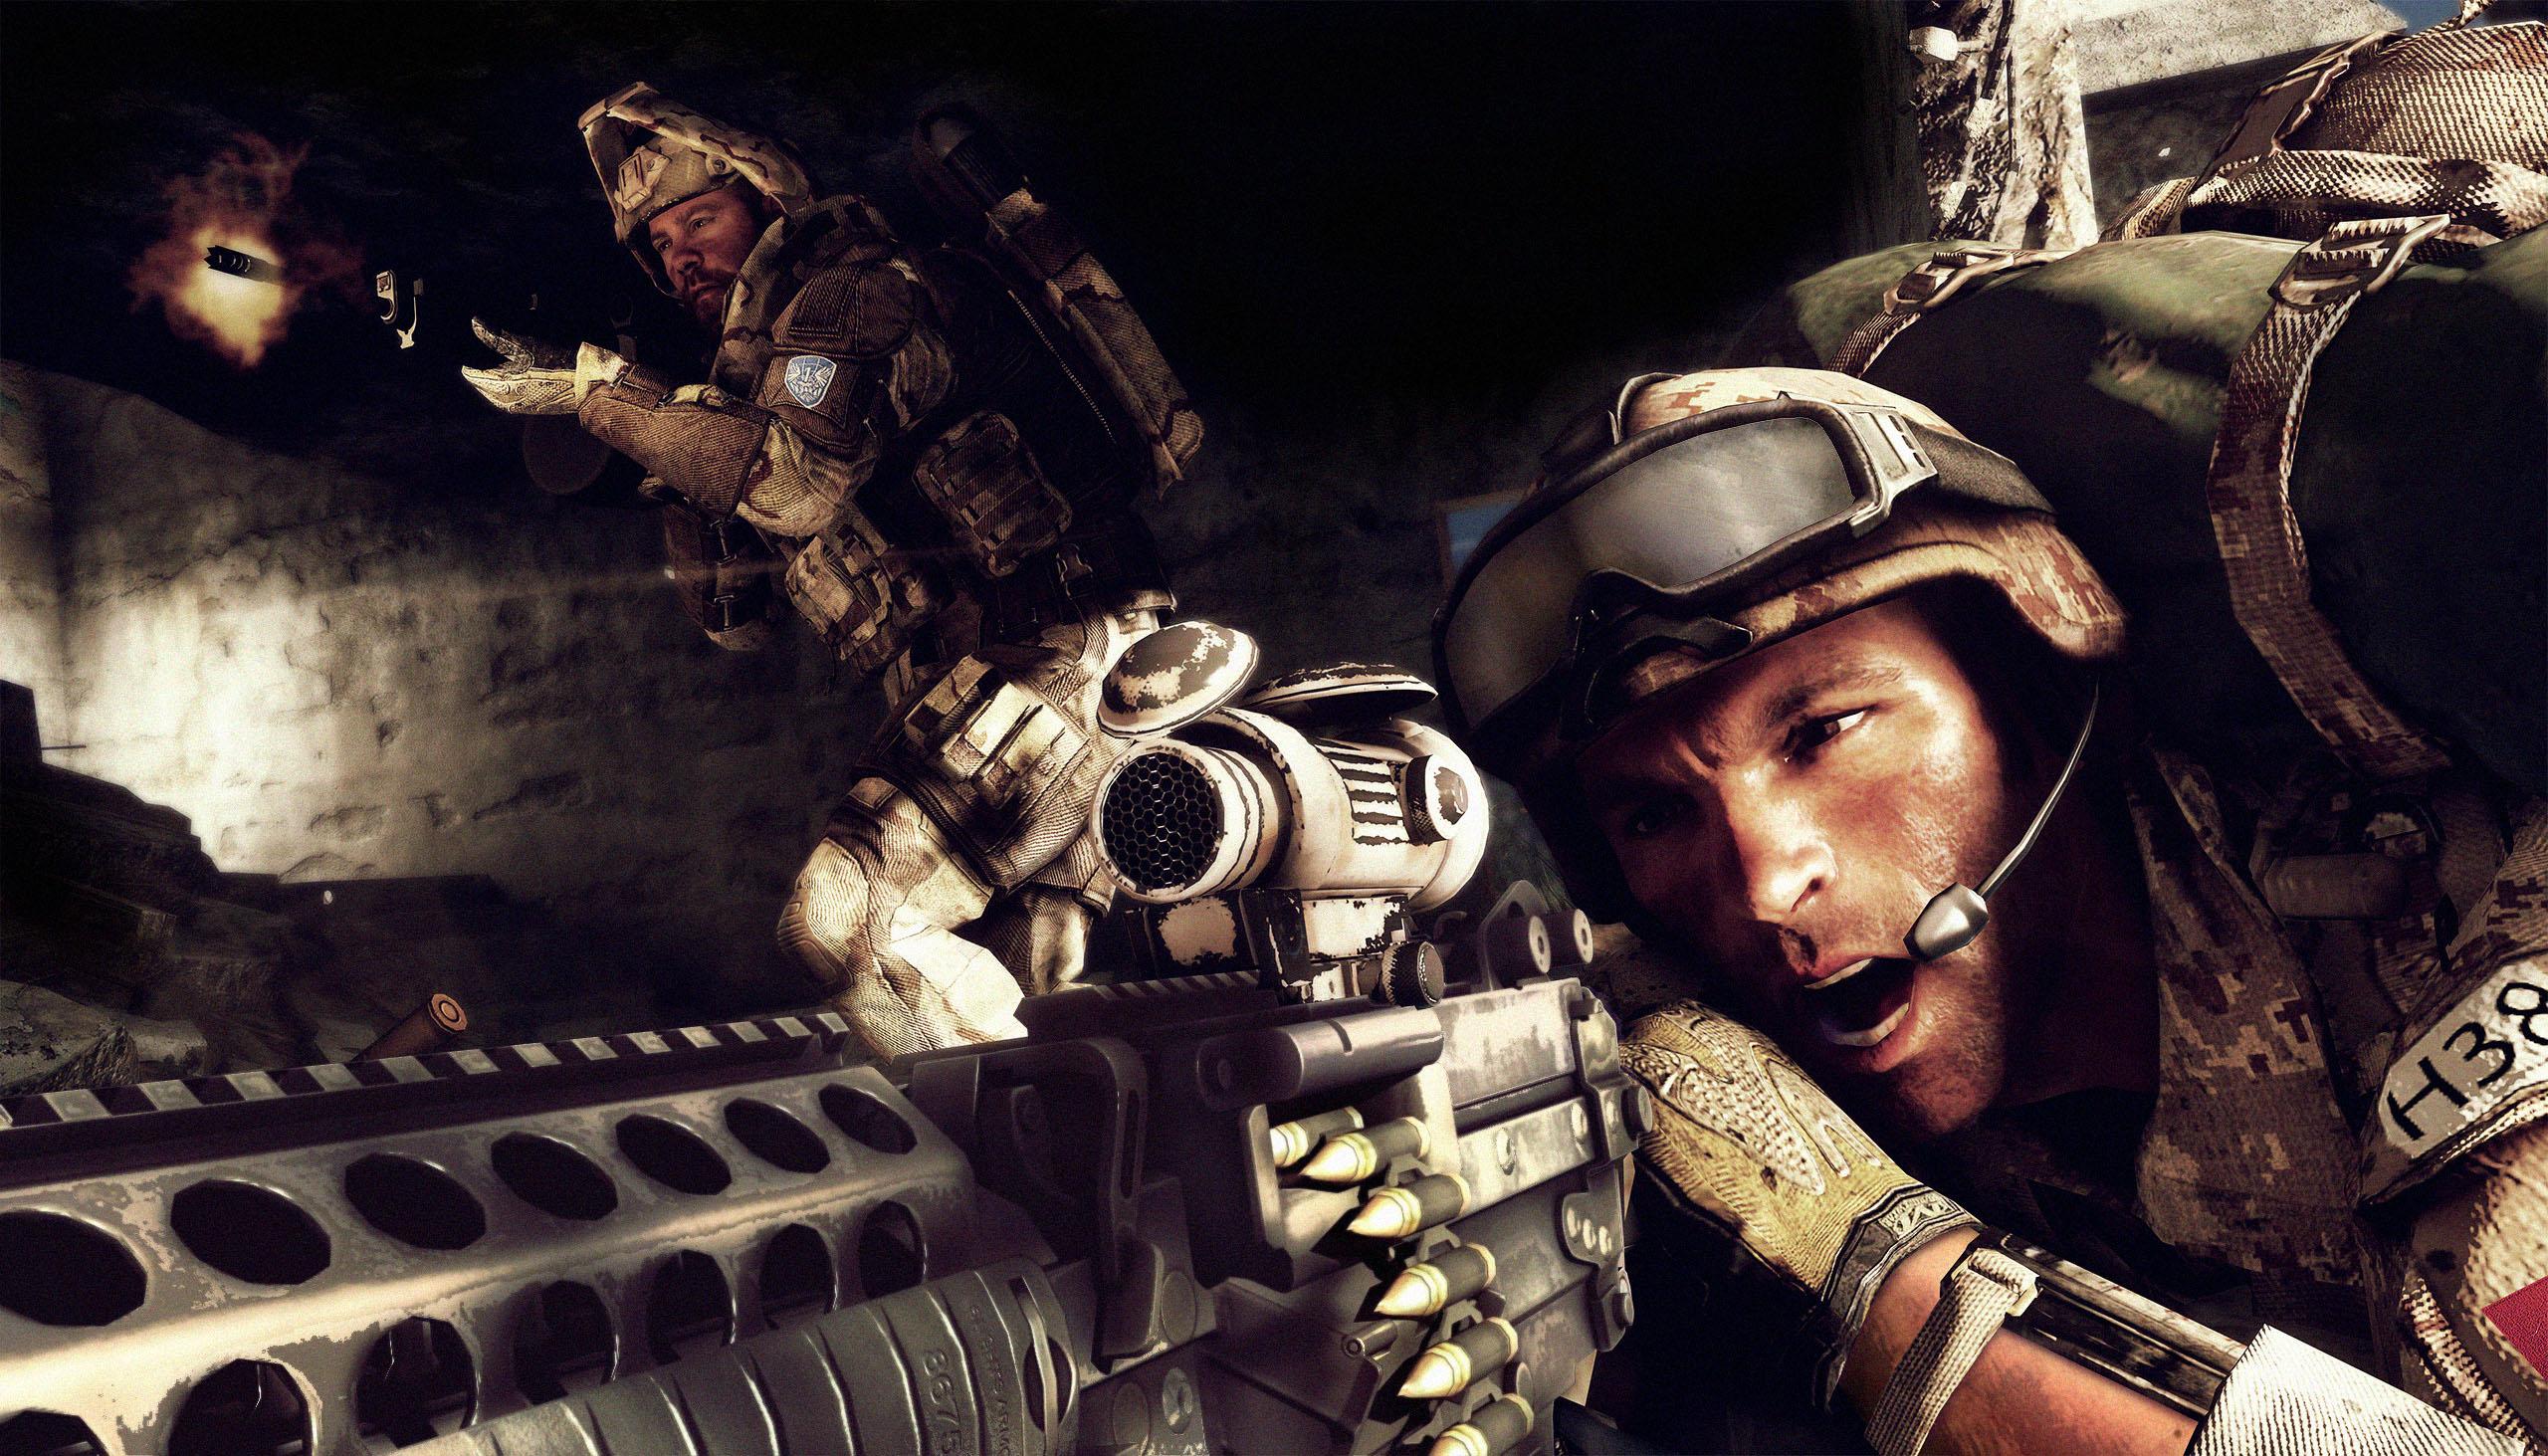 medal of honor warfighter download